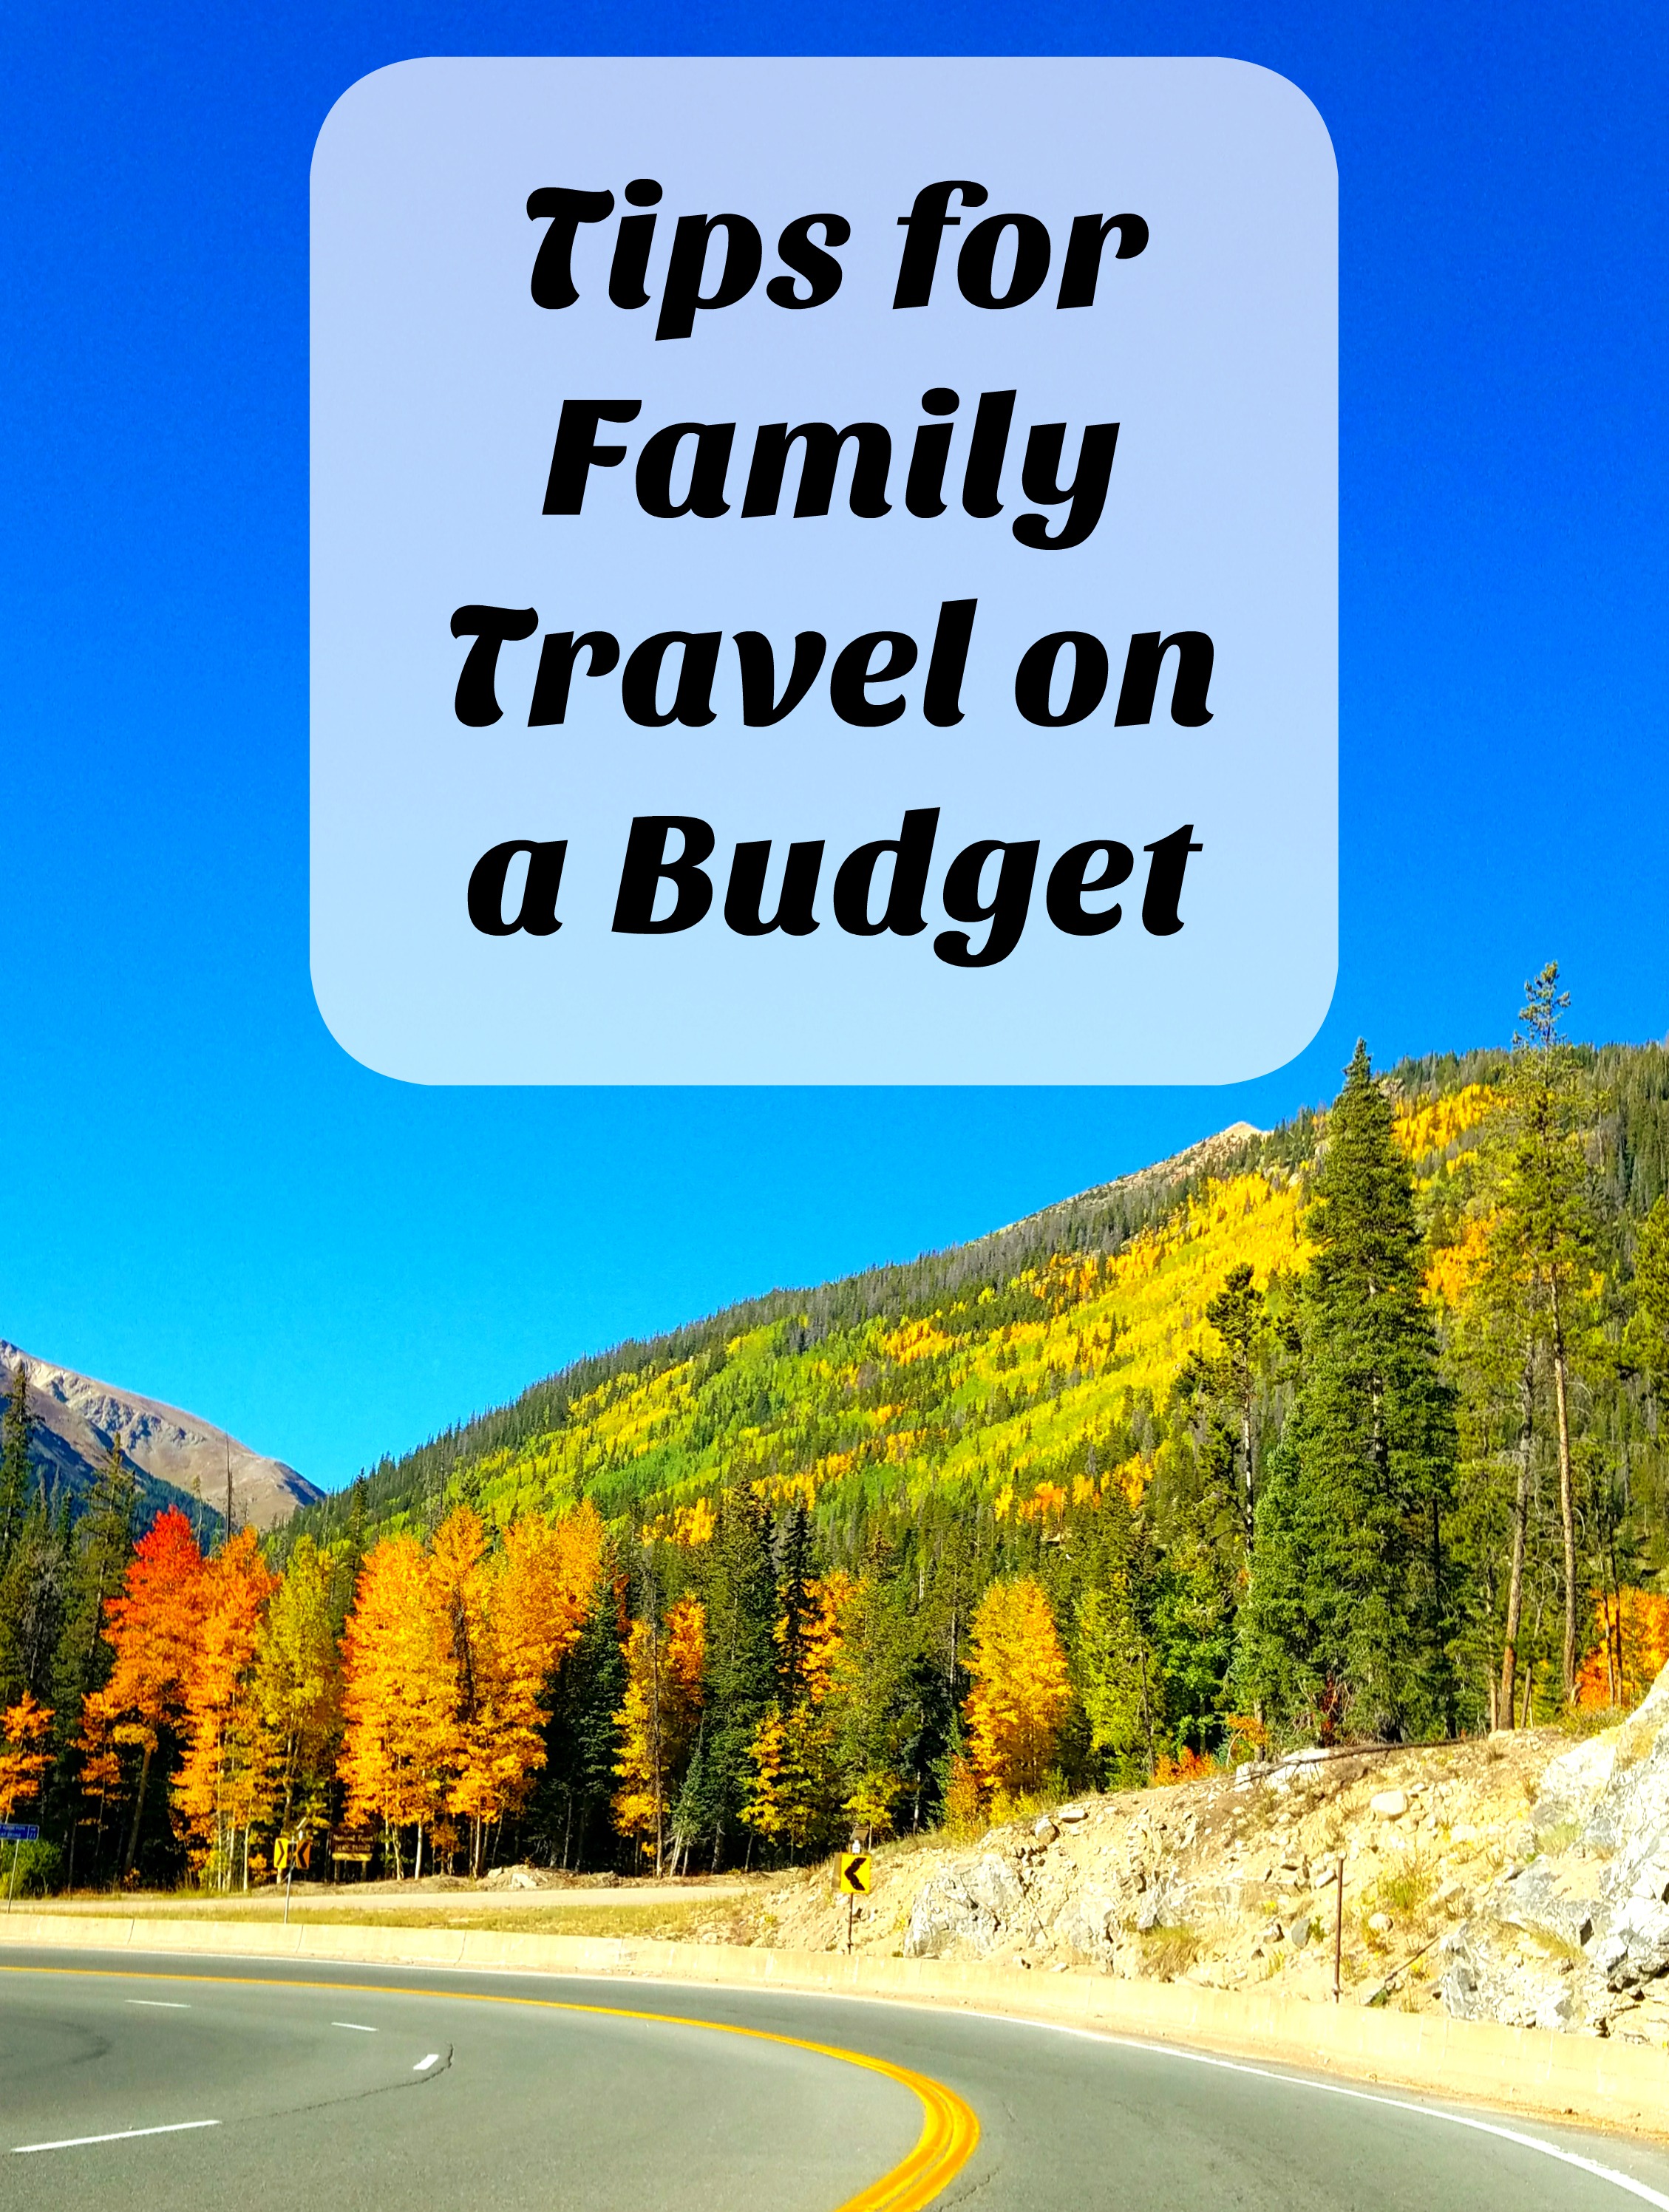 Tips for Family Travel on a Budget